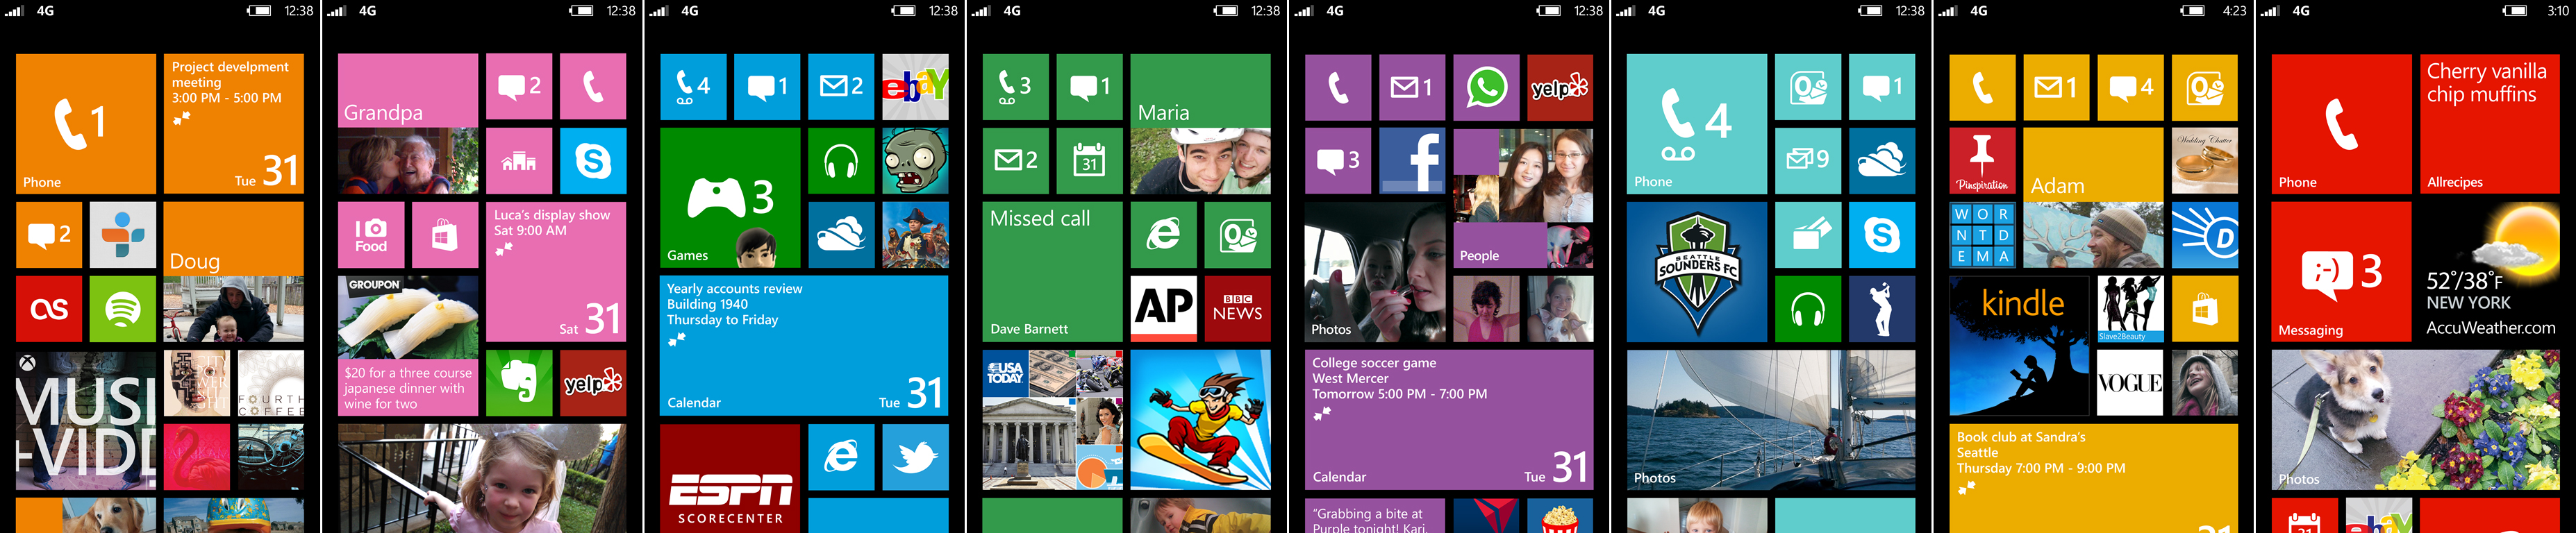 Windows Phone 8 Start screen - for some reason we don't have an alt tag here